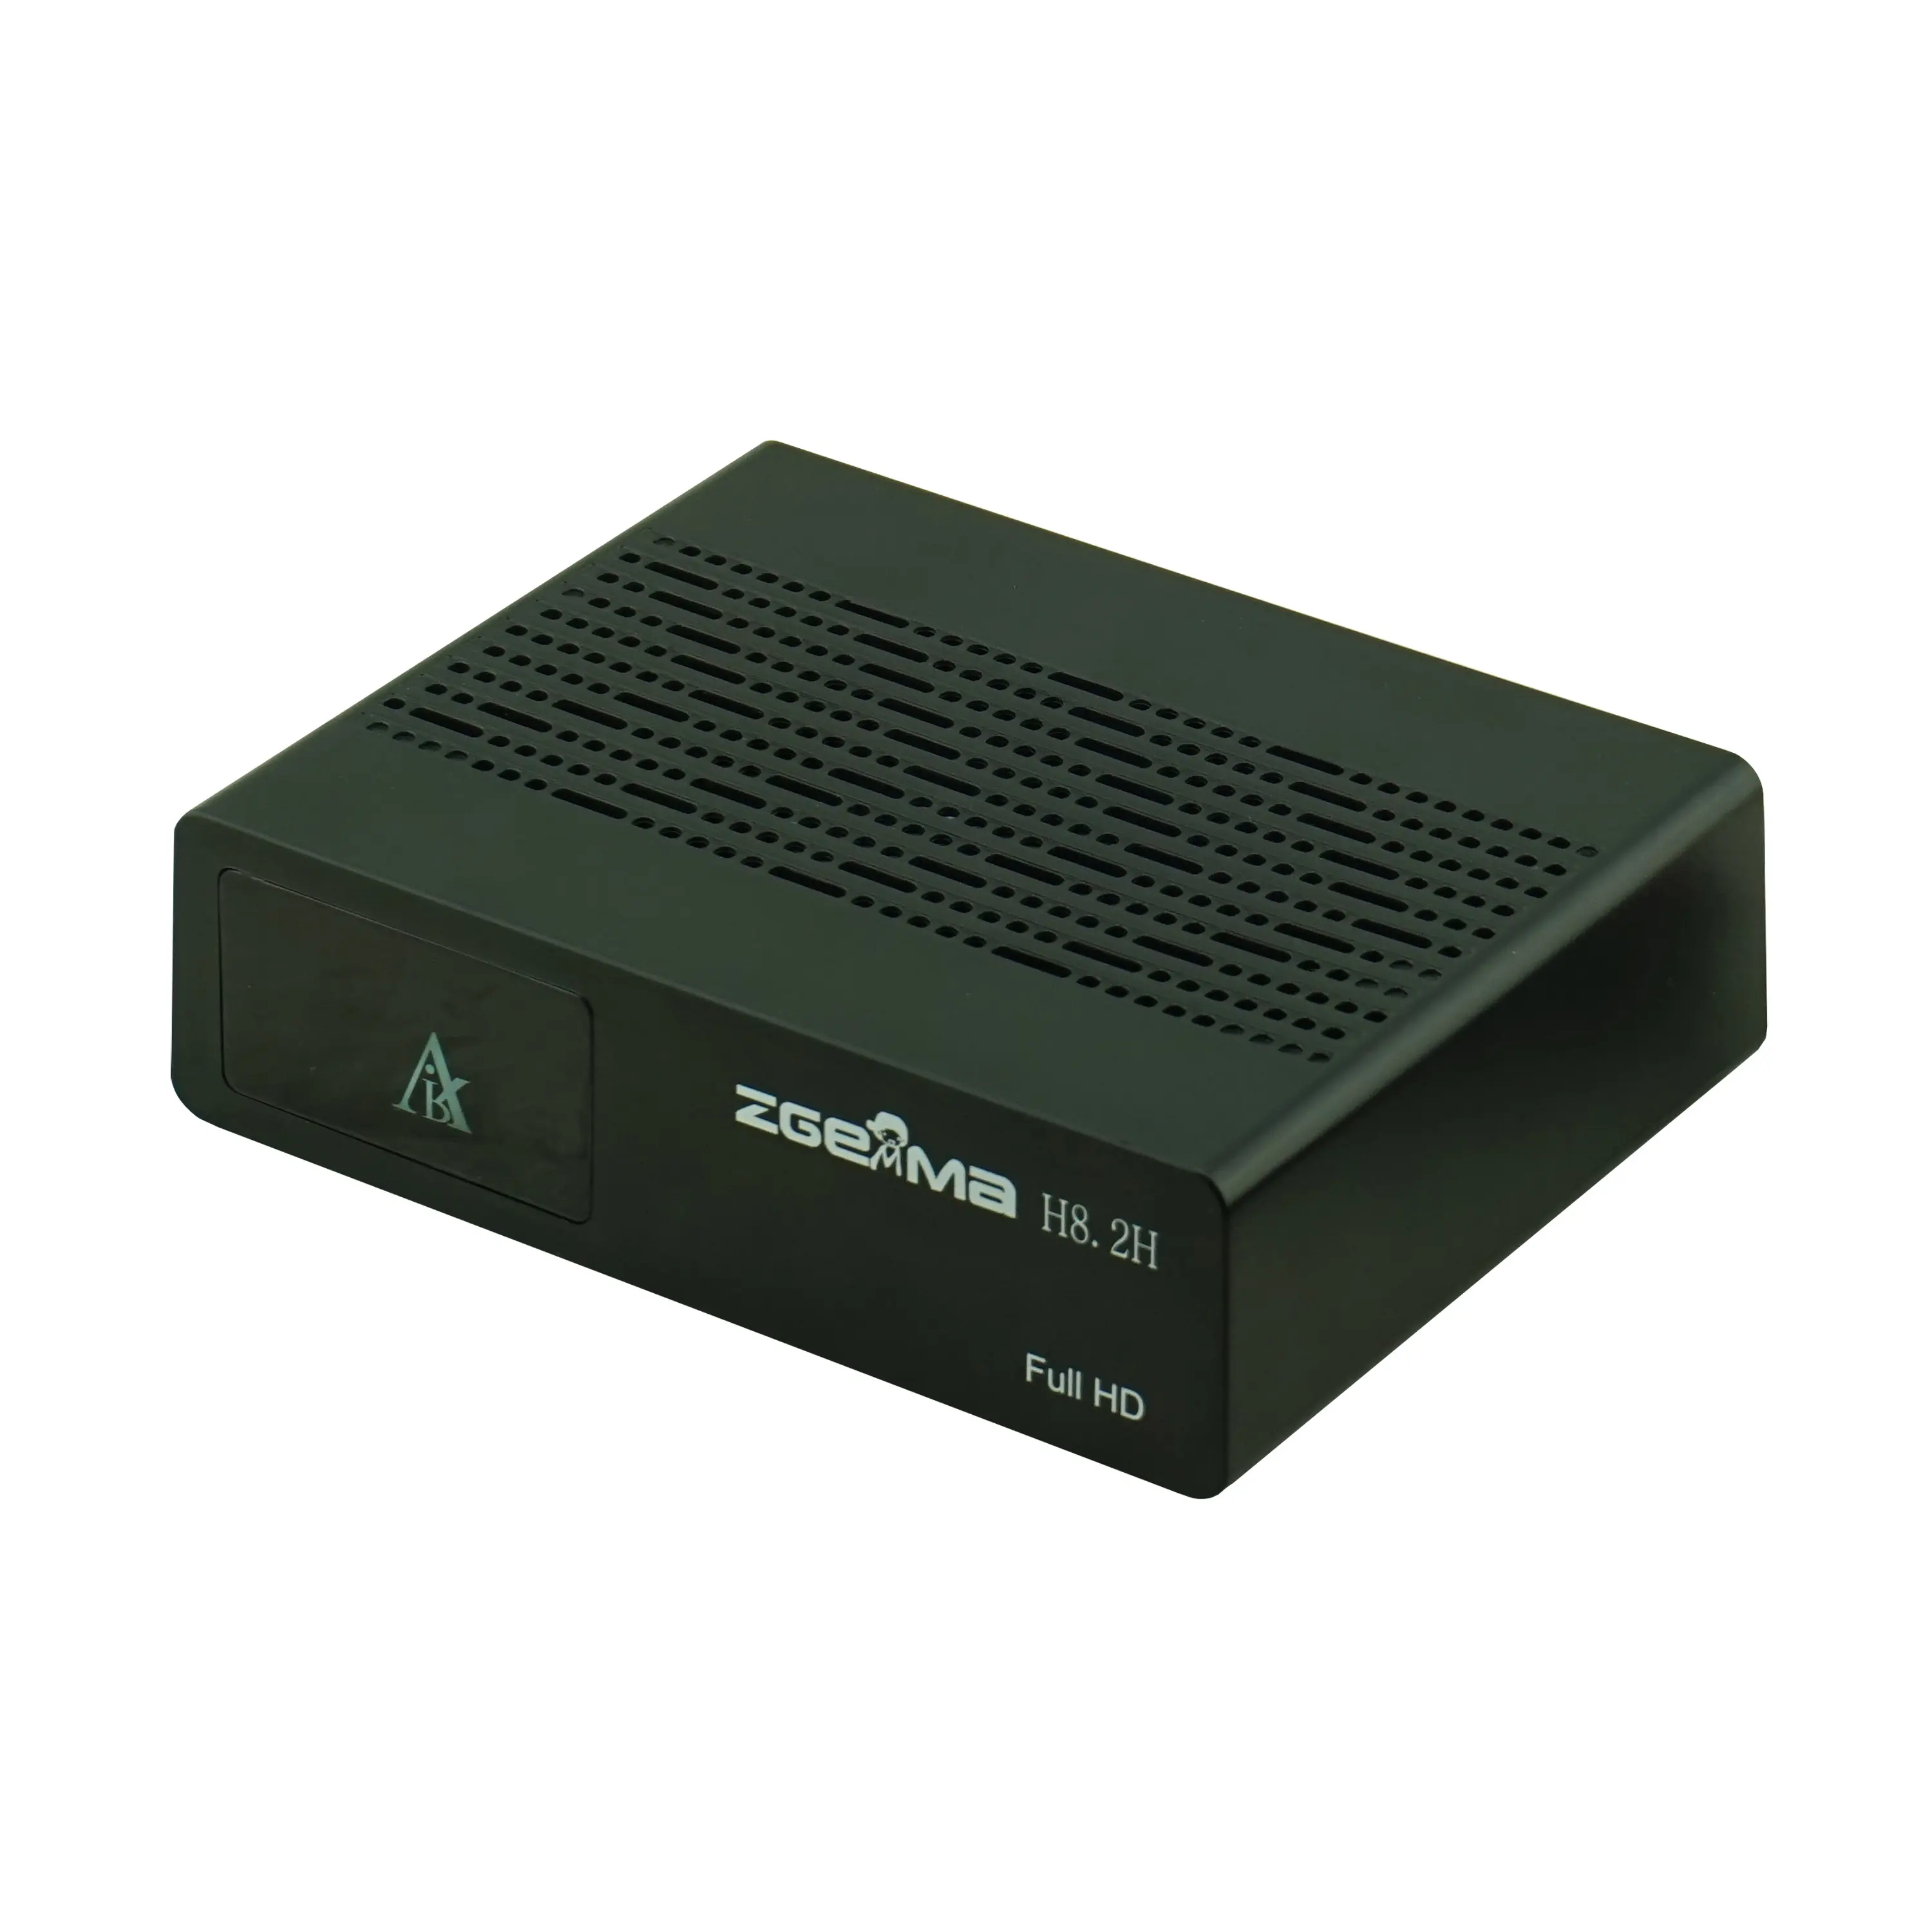 Feature-Rich ZGEMMA H8.2H Satellite TV Receiver with Enigma2 Linux OS and DVB-S2X + DVB-T2/C Combo Tuner tv decoder